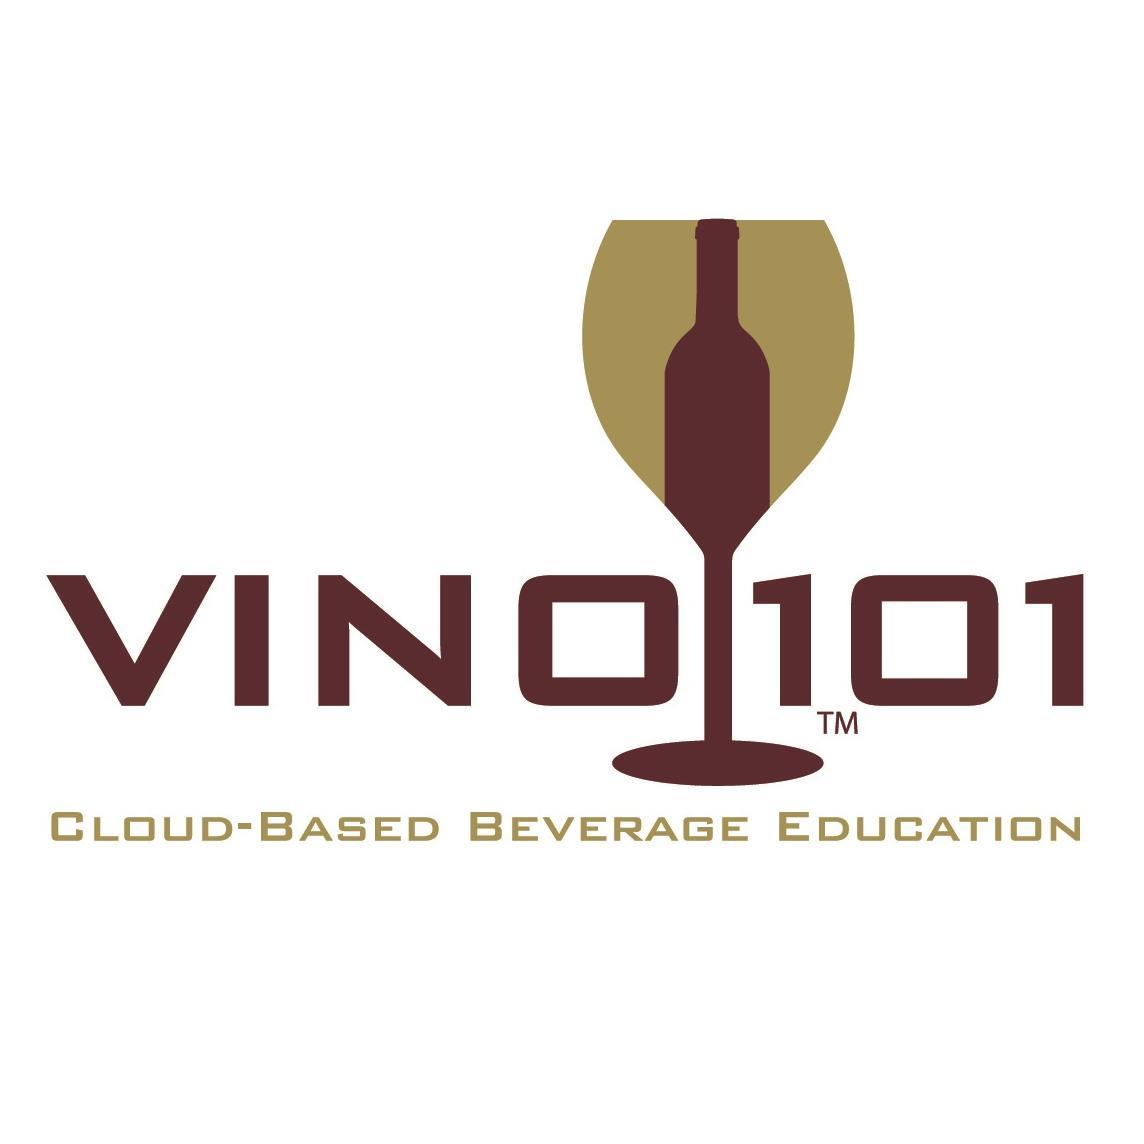 Cloud-Based Beverage Education for Foodservice, Hospitality & Retail